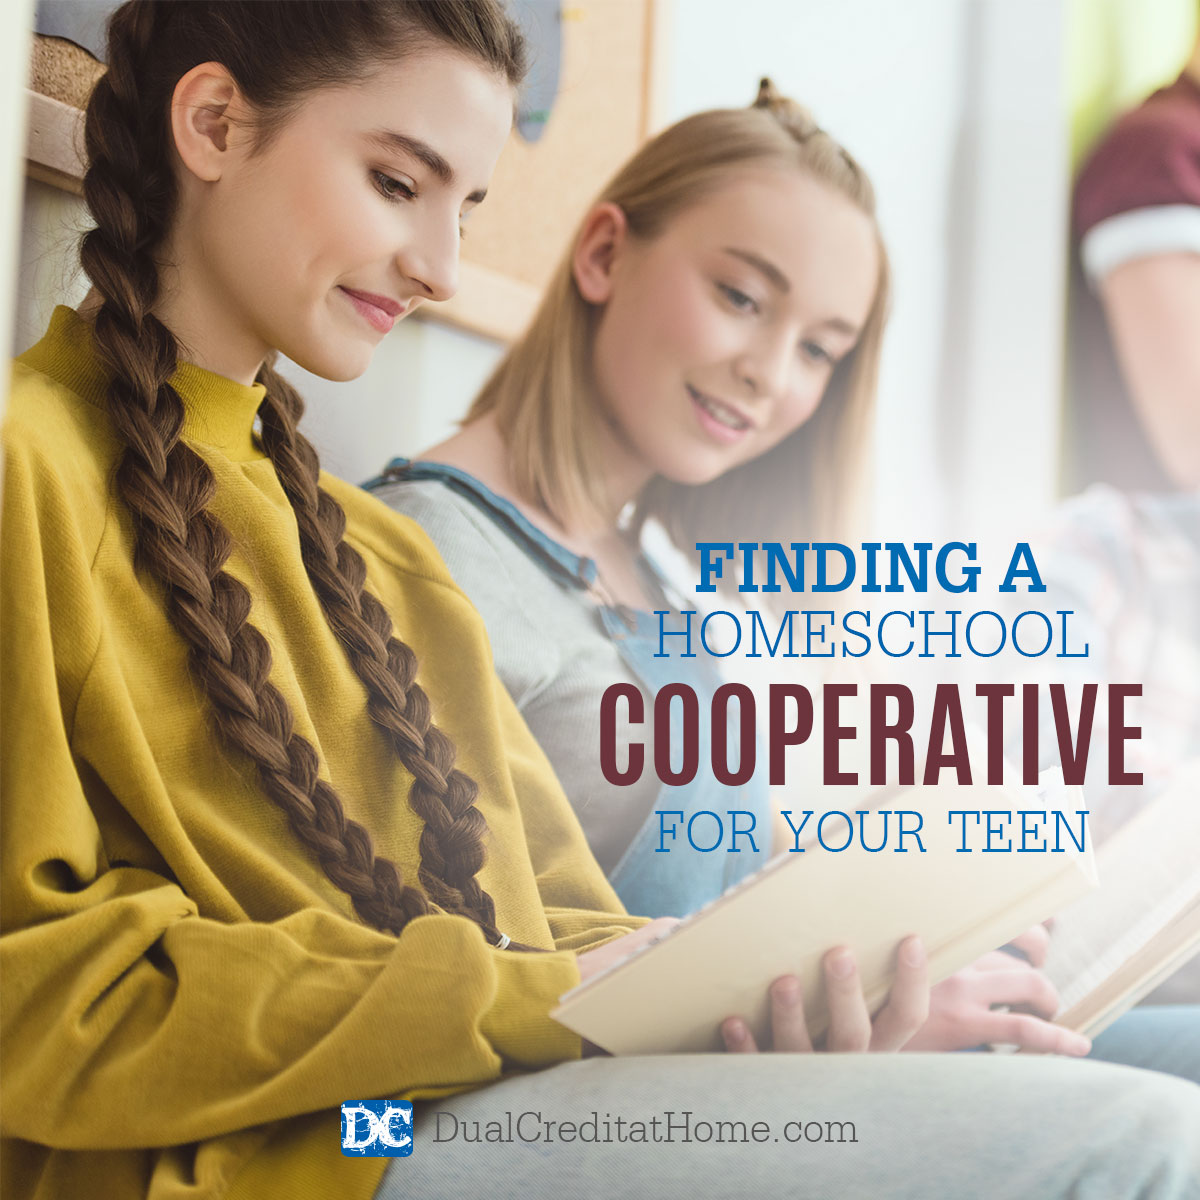 Finding A Homeschool Cooperative for Your Teen